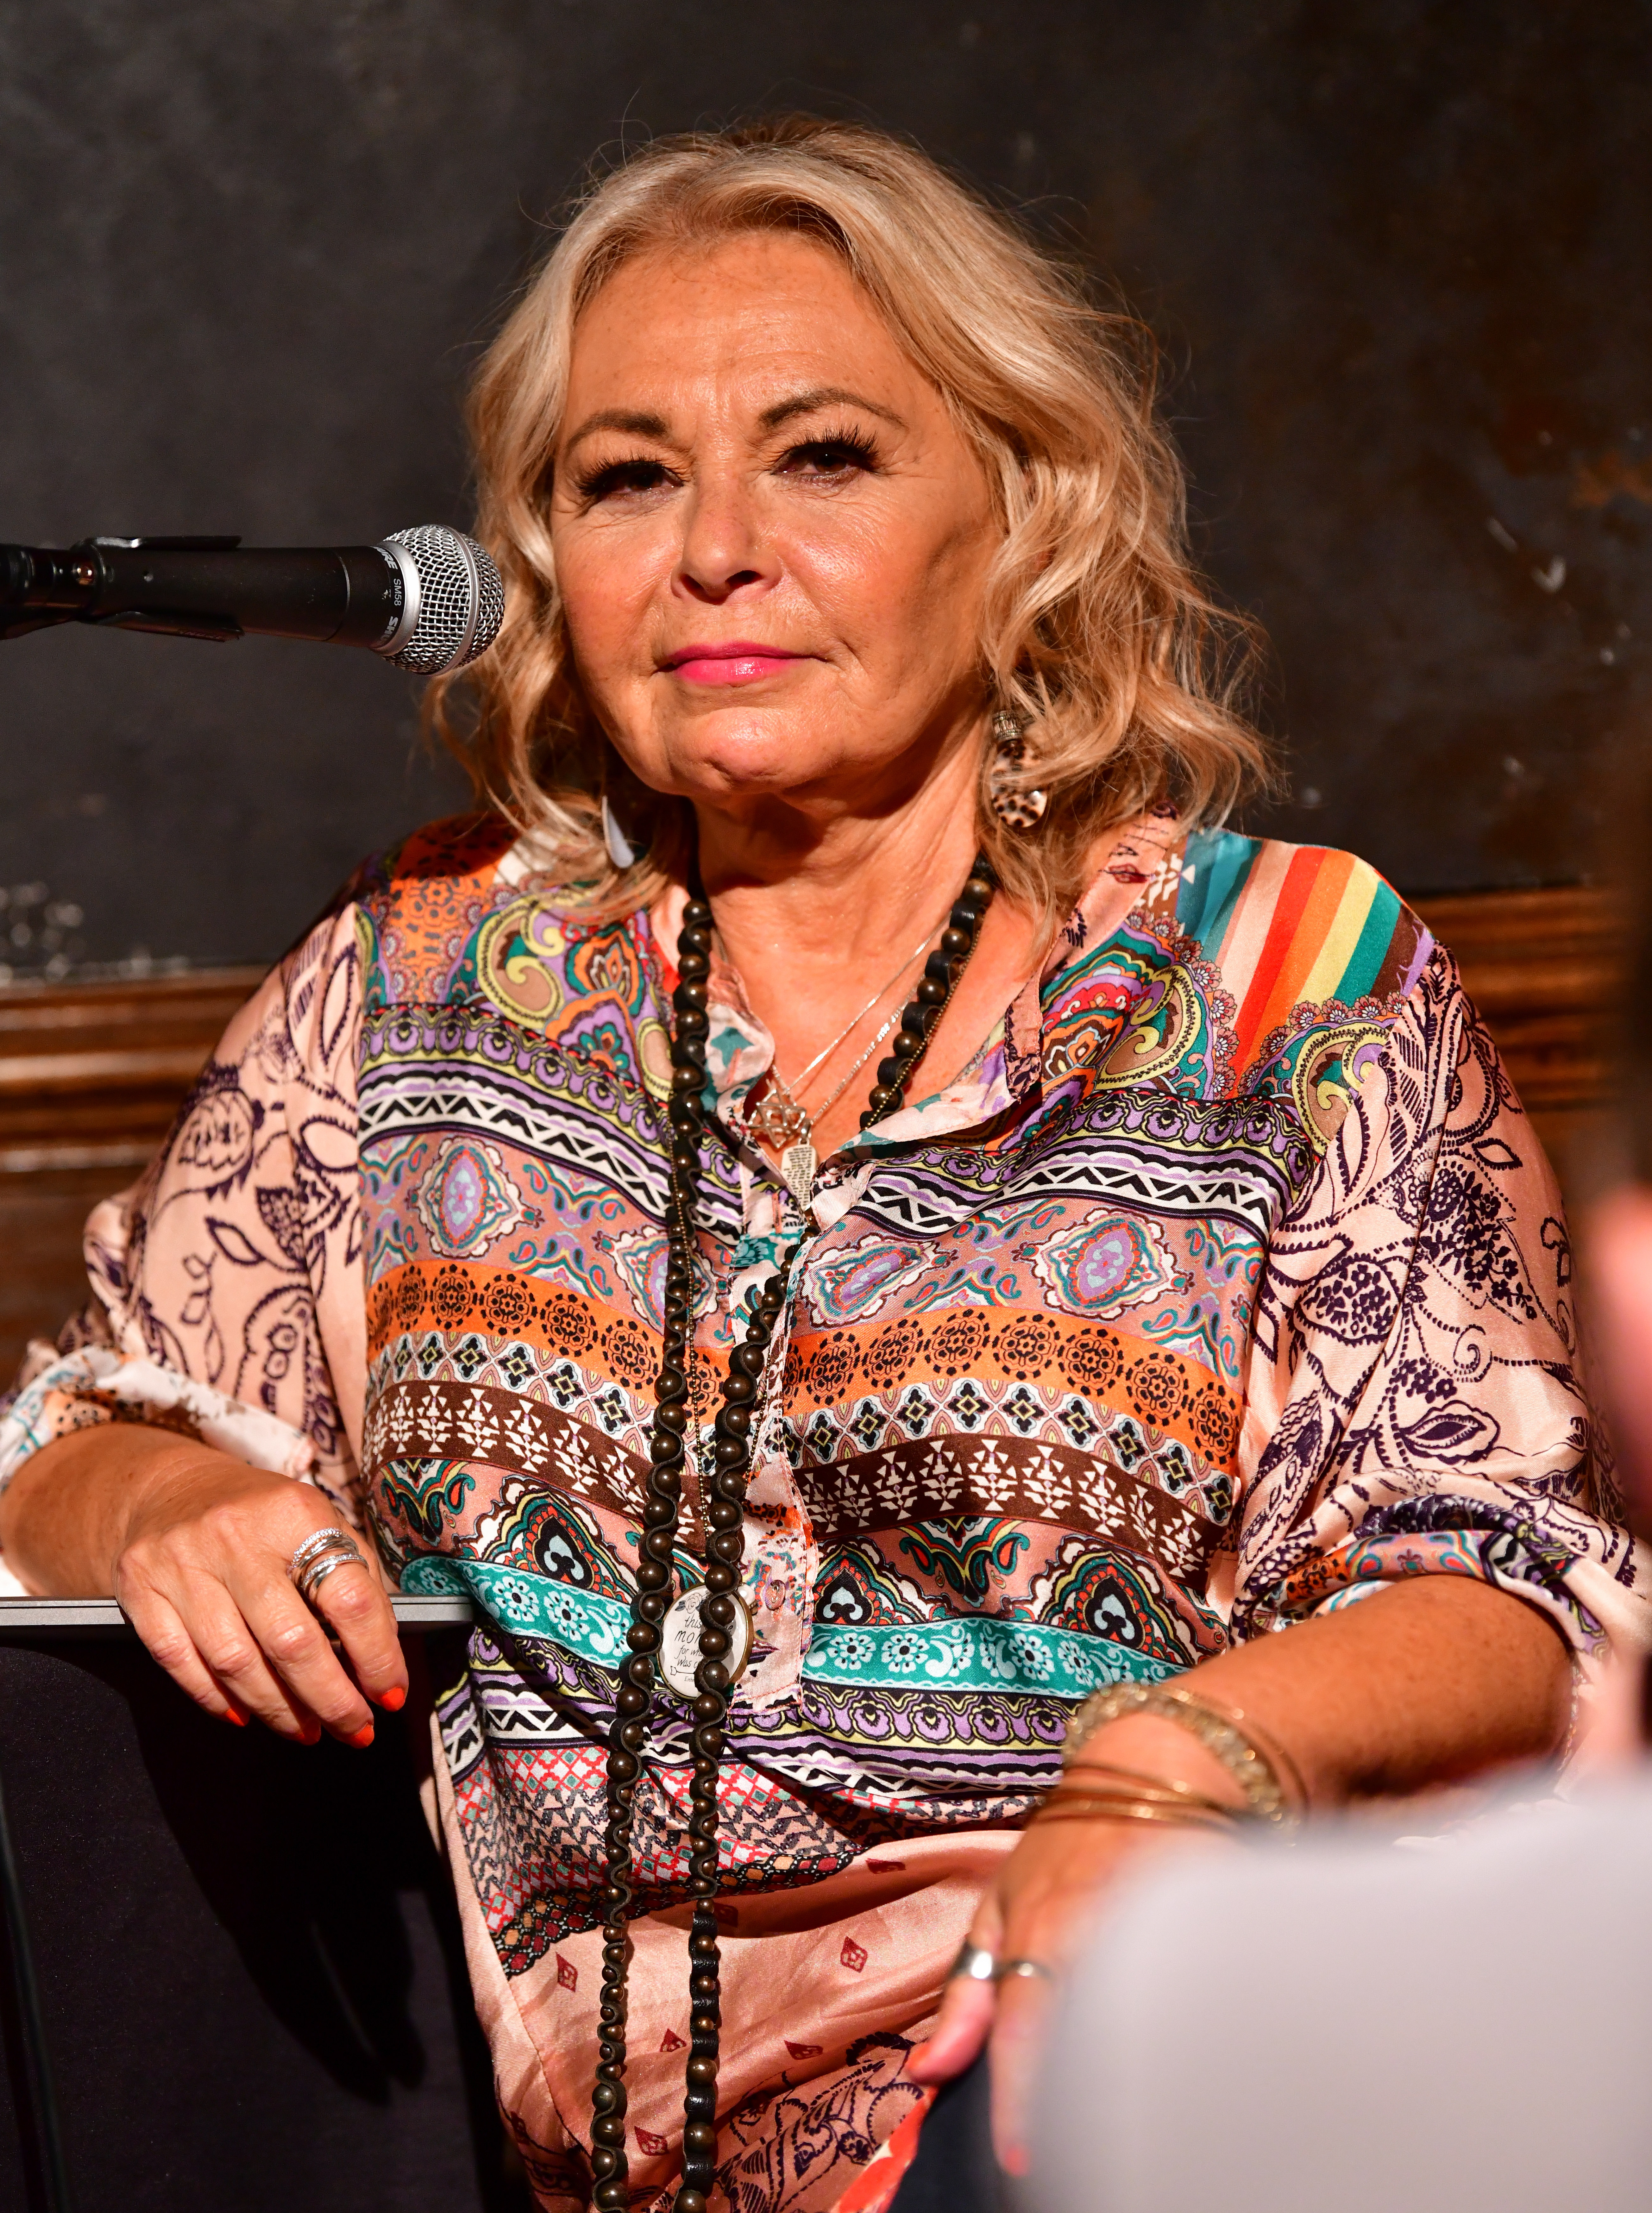 Roseanne Barr on July 26, 2018, in New York City. | Source: Getty Images